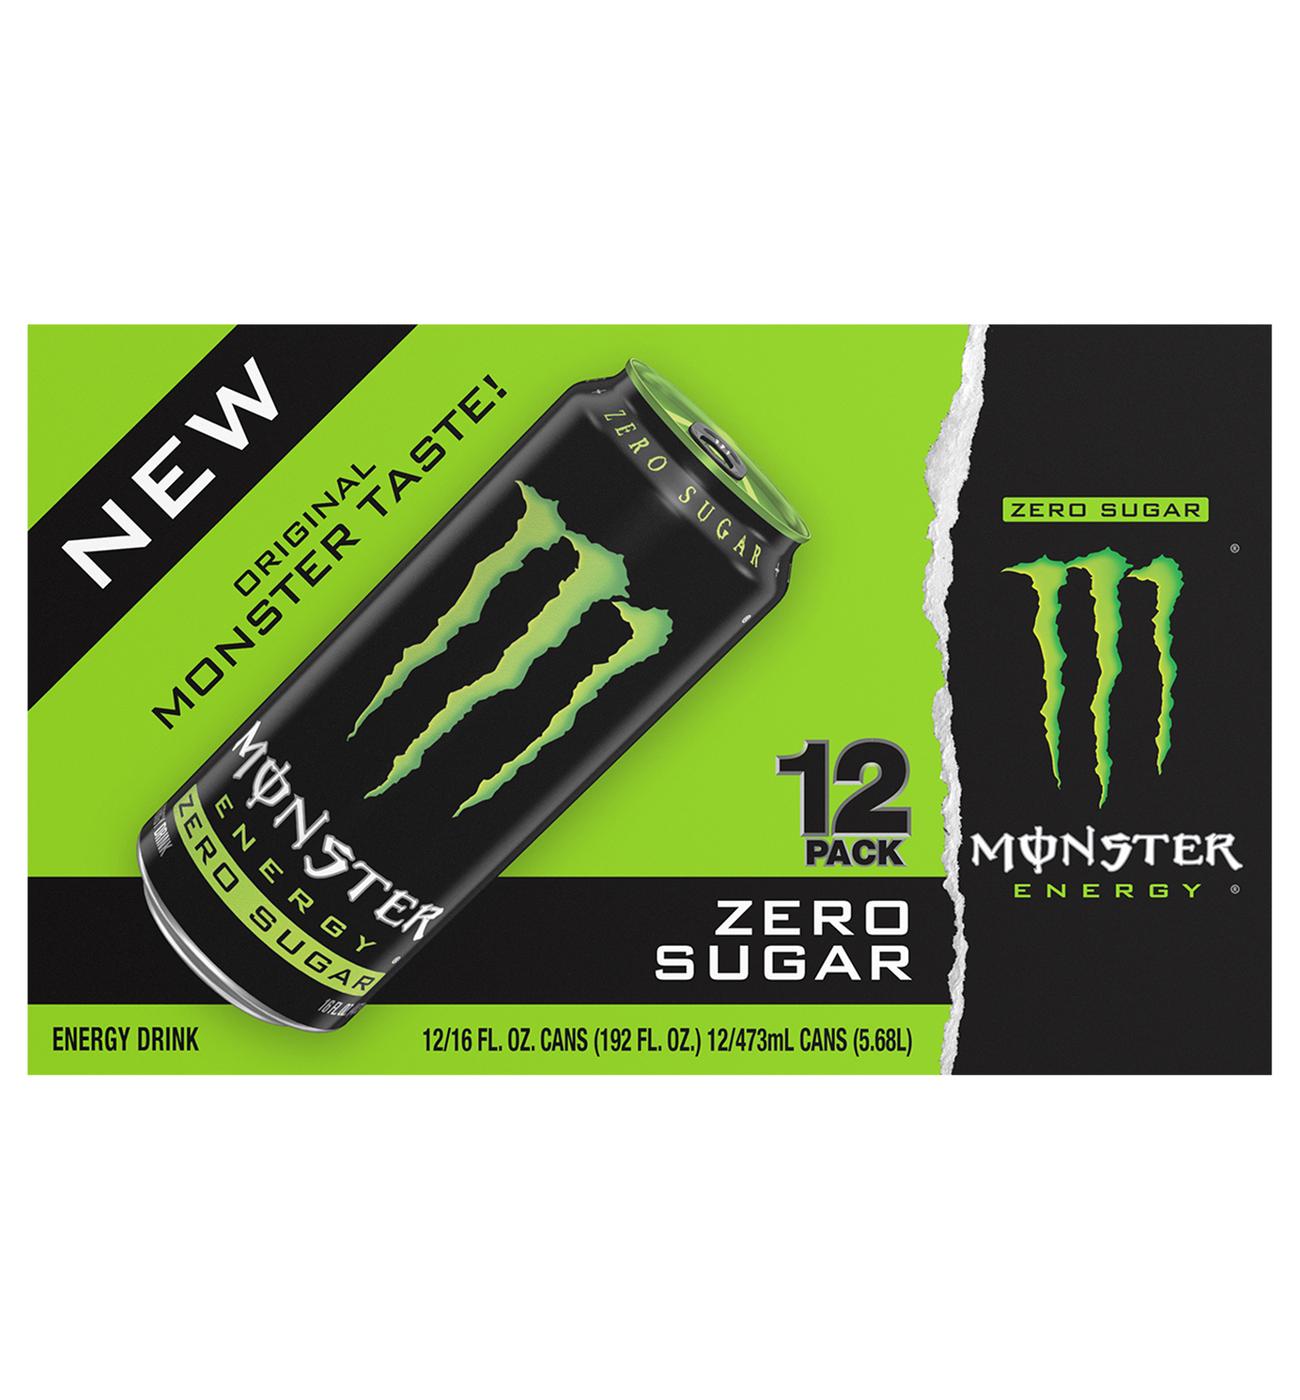 Monster Energy Zero Sugar 12 pk Cans; image 1 of 2